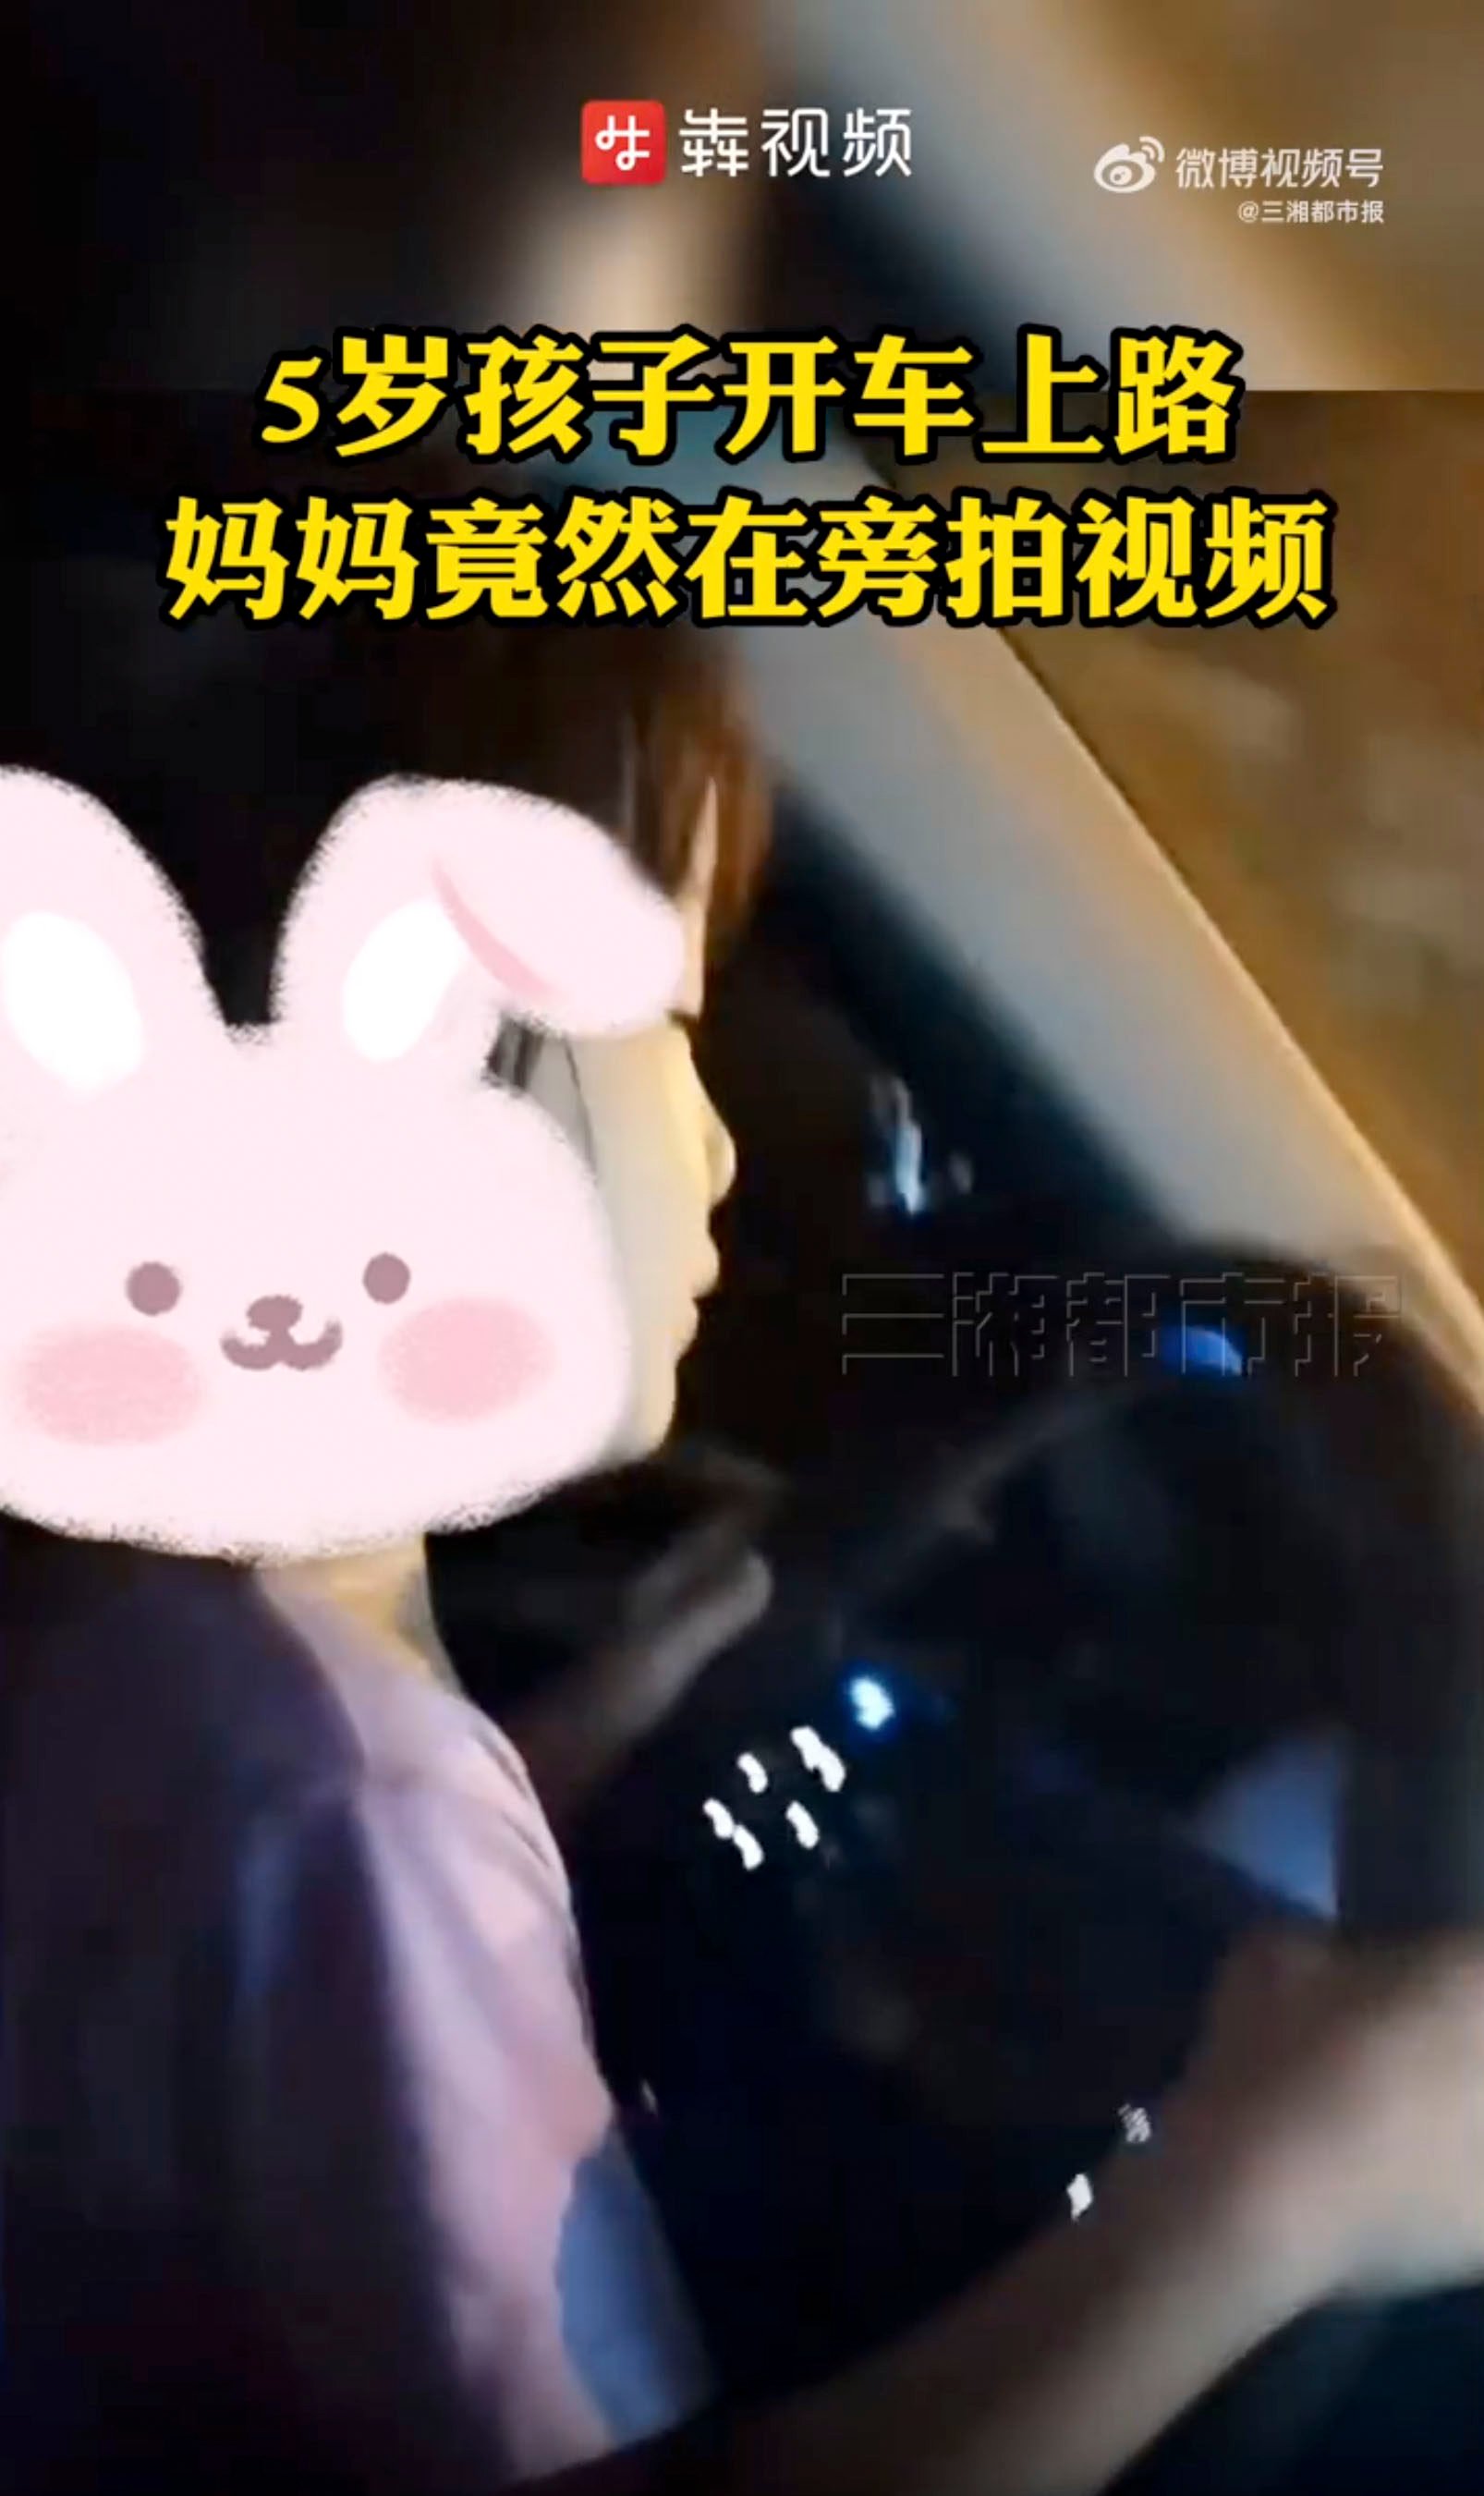 The girl at the wheel of her parent’s car in a video of the joyride taken by her mother that she posted on social media, alerting police to their crime after horrified members of the public watched it. Photo: Weibo